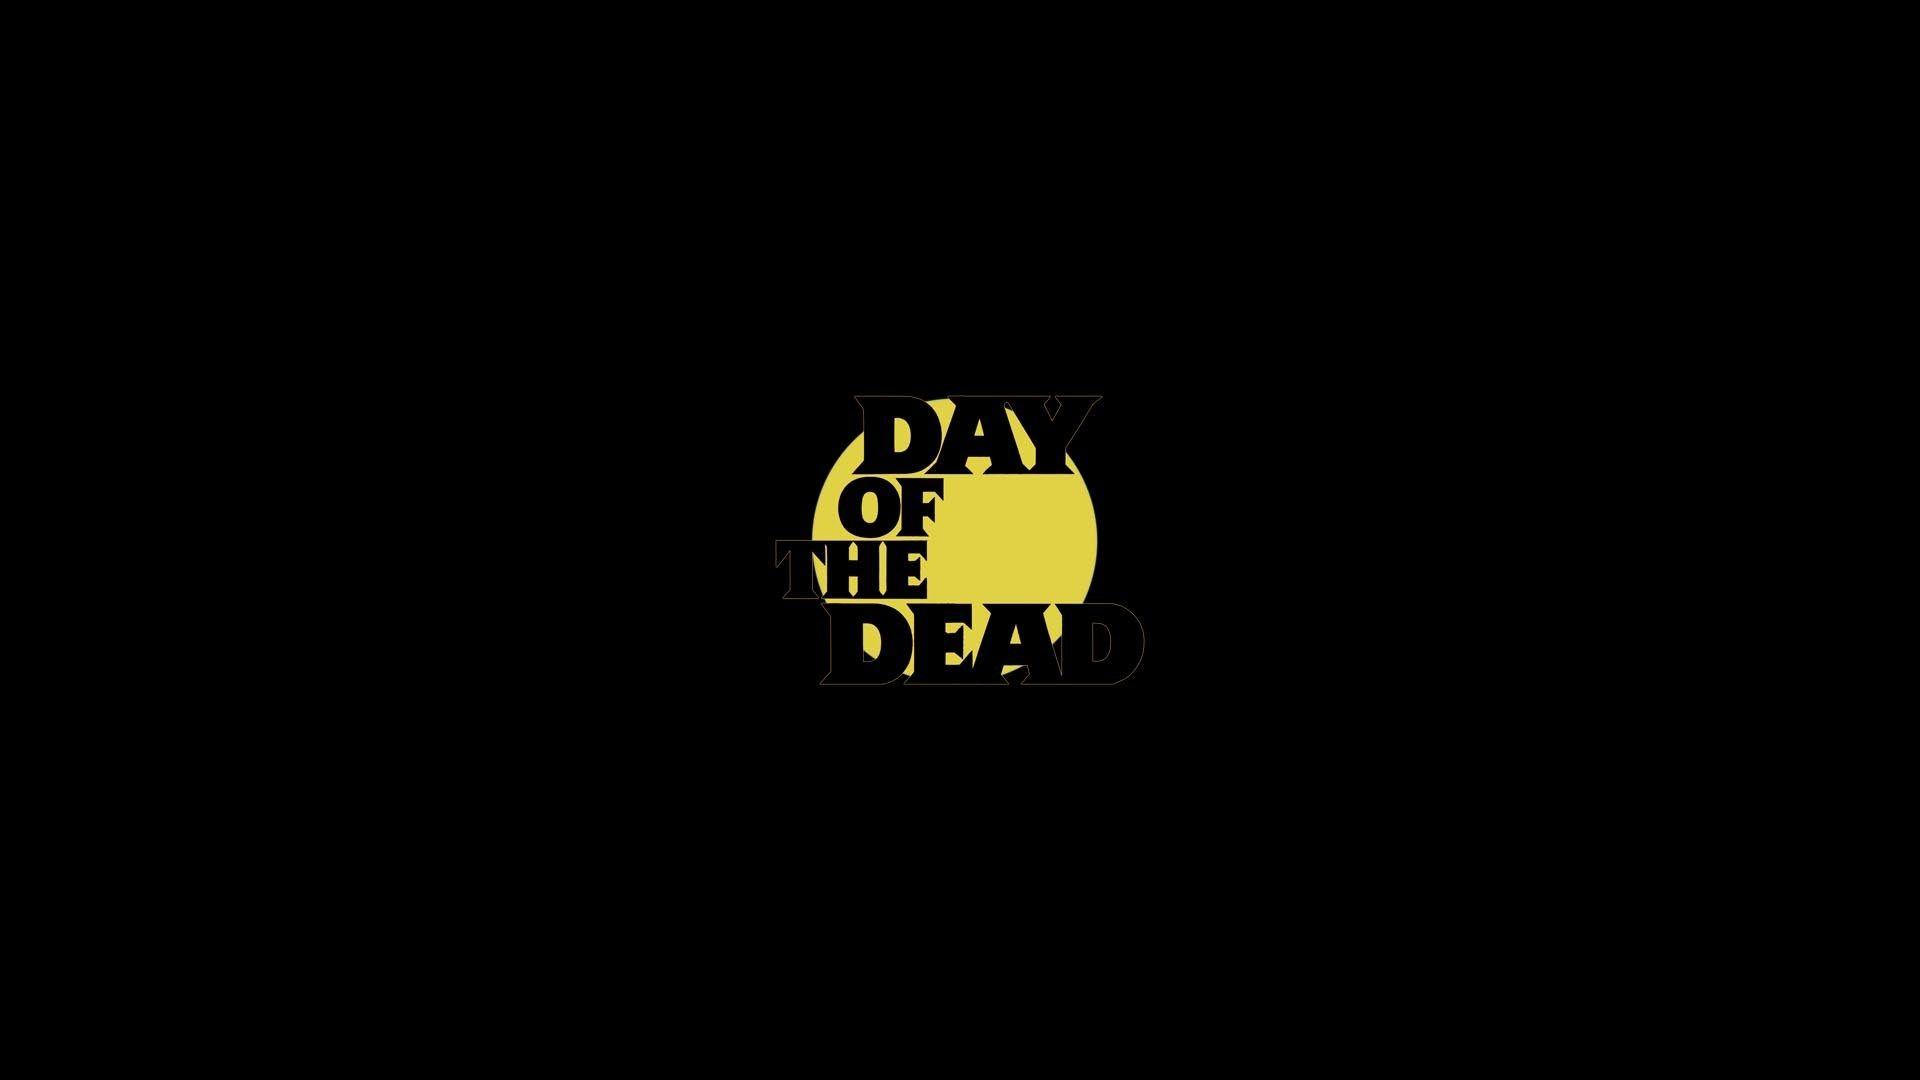 2017 03 16 Of The Dead 1985 Wallpaper: Wallpaper Collection